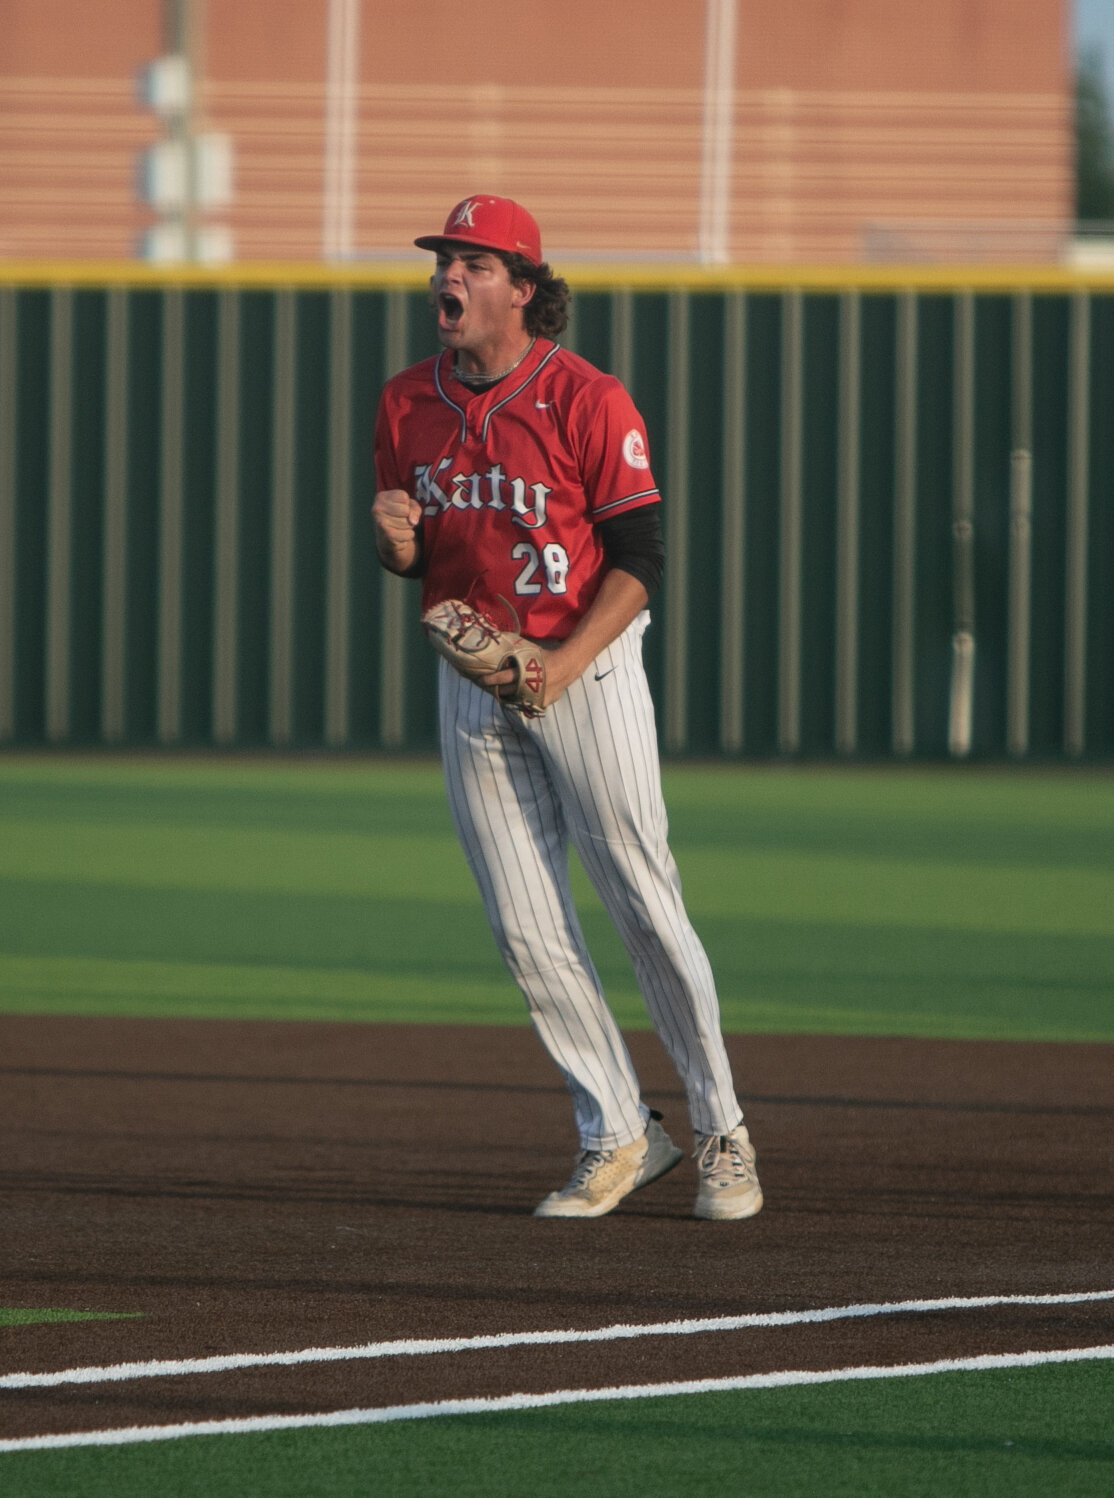 Coe Kaase celebrates after an out during Saturday's Regional Quarterfinal between Katy and Tompkins at Cy-Springs.